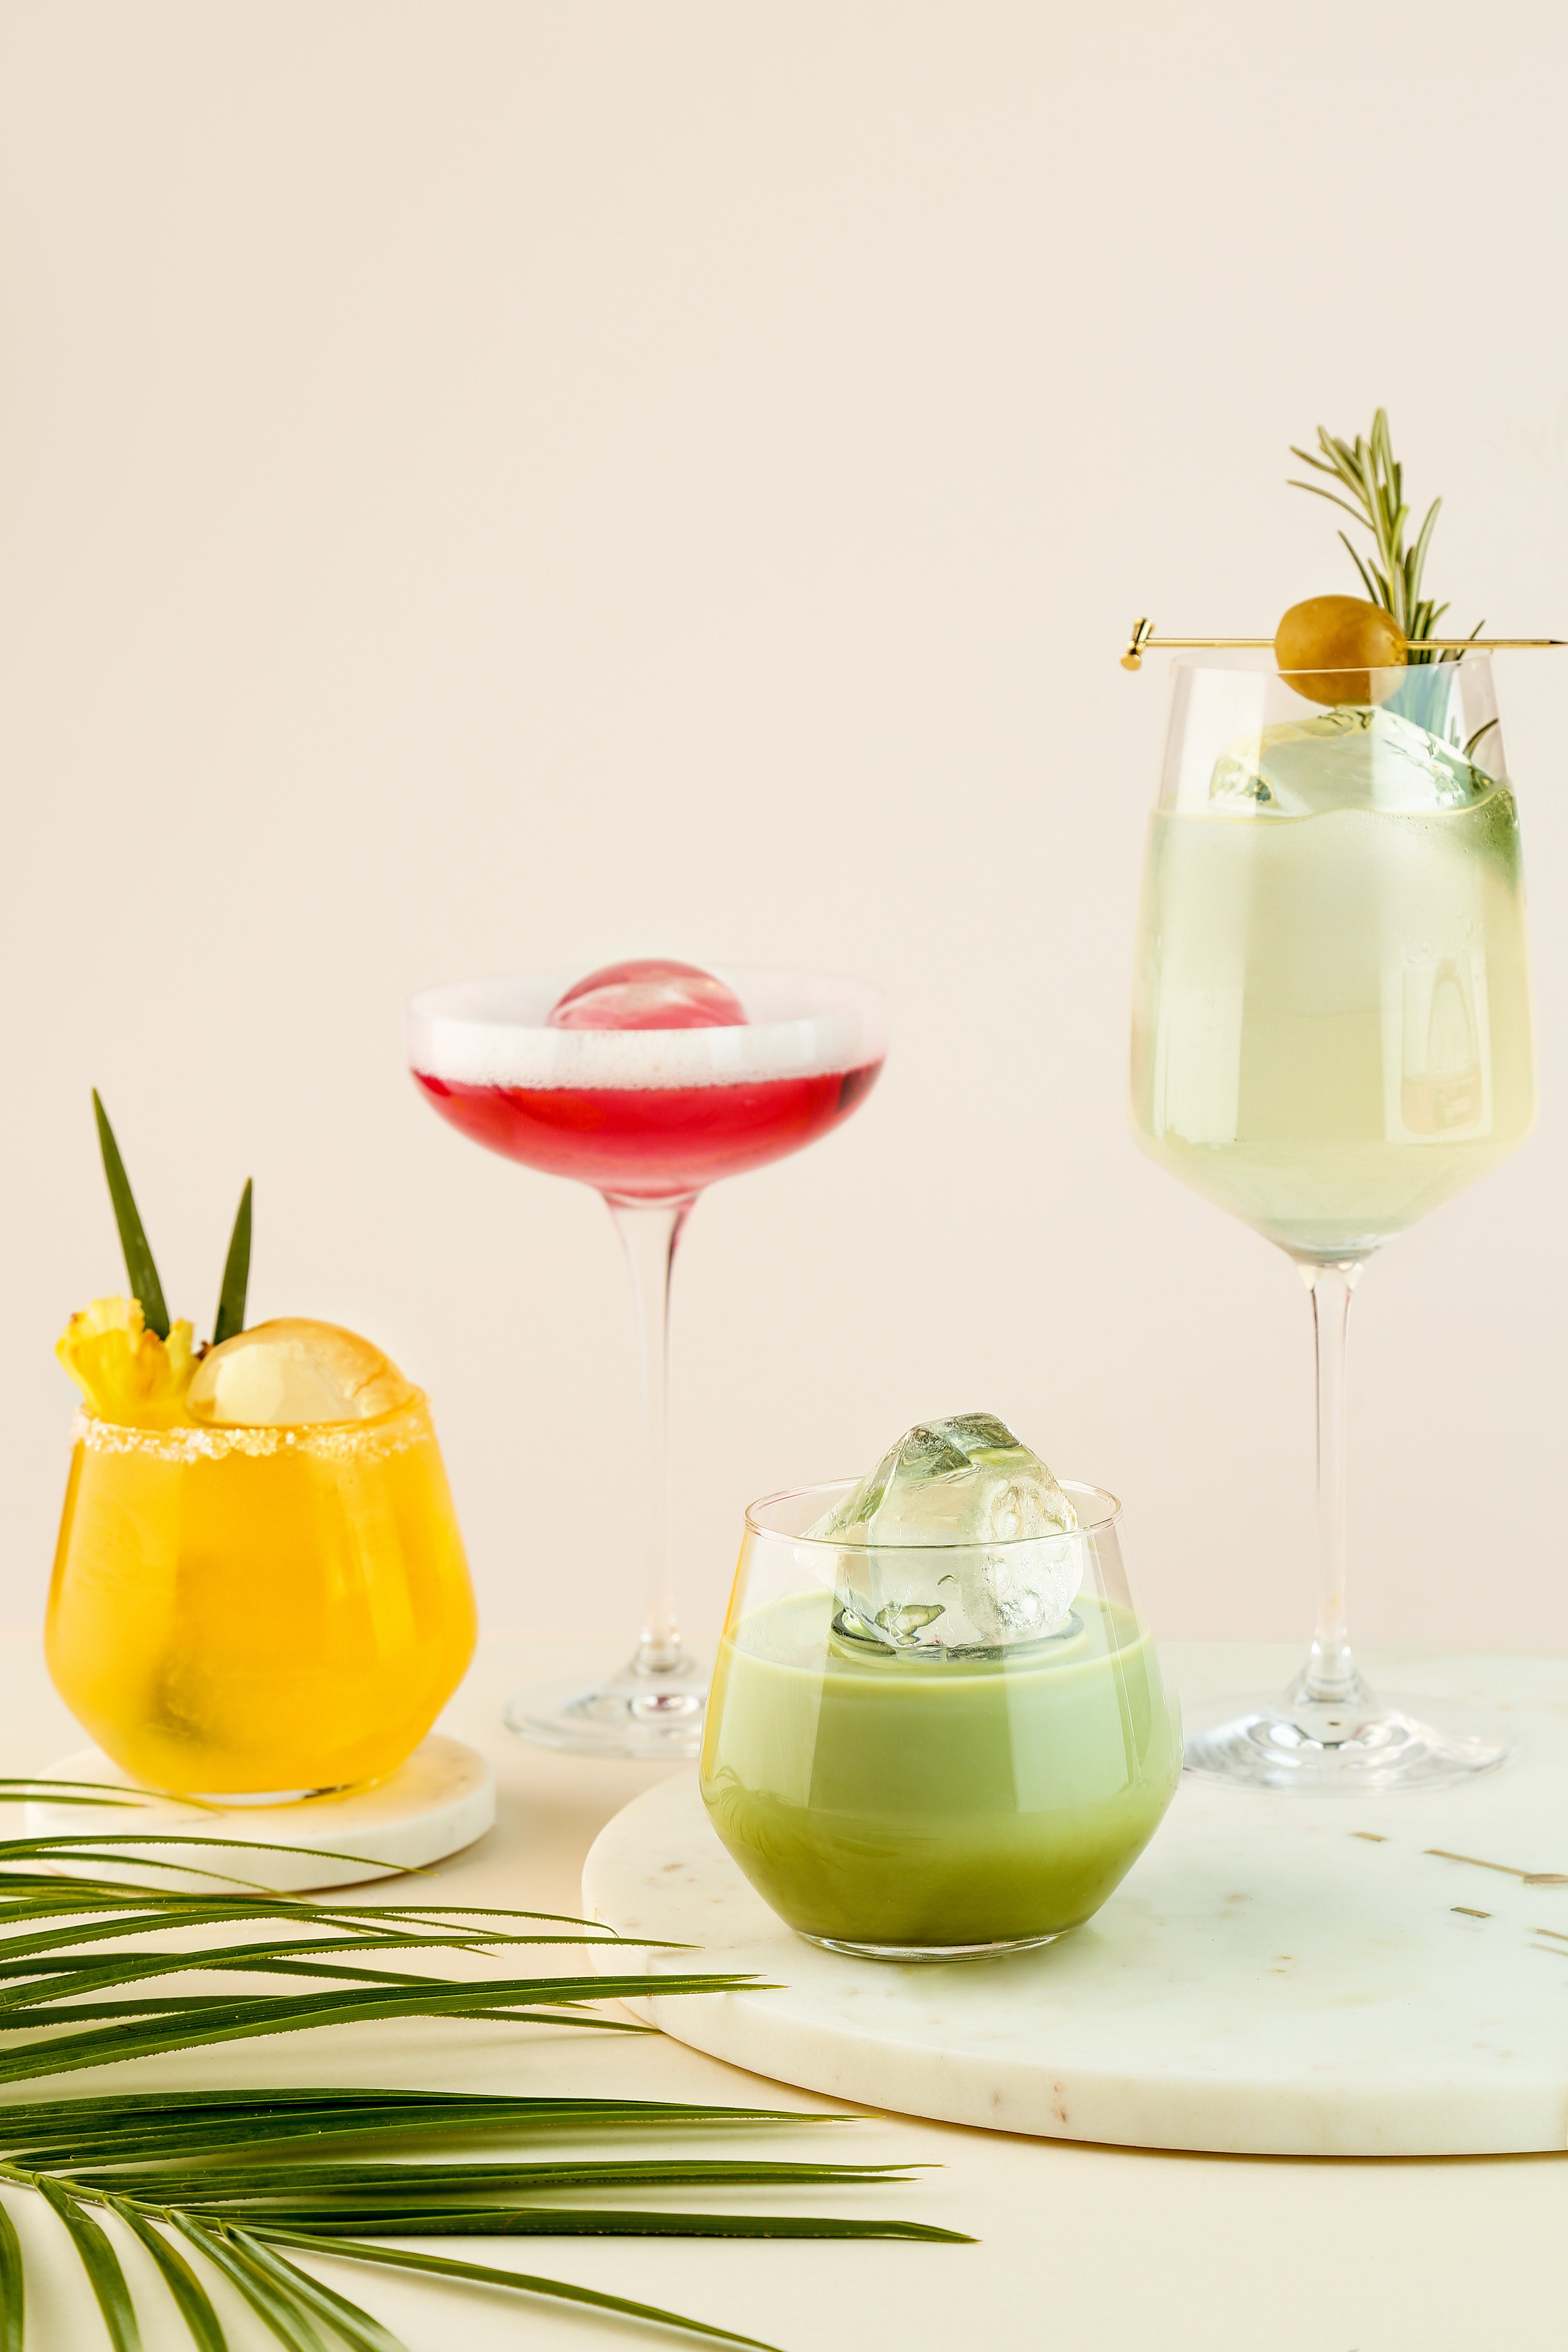 Using Artisanal Vegetable Ice Cubes In Cocktails And Mocktails